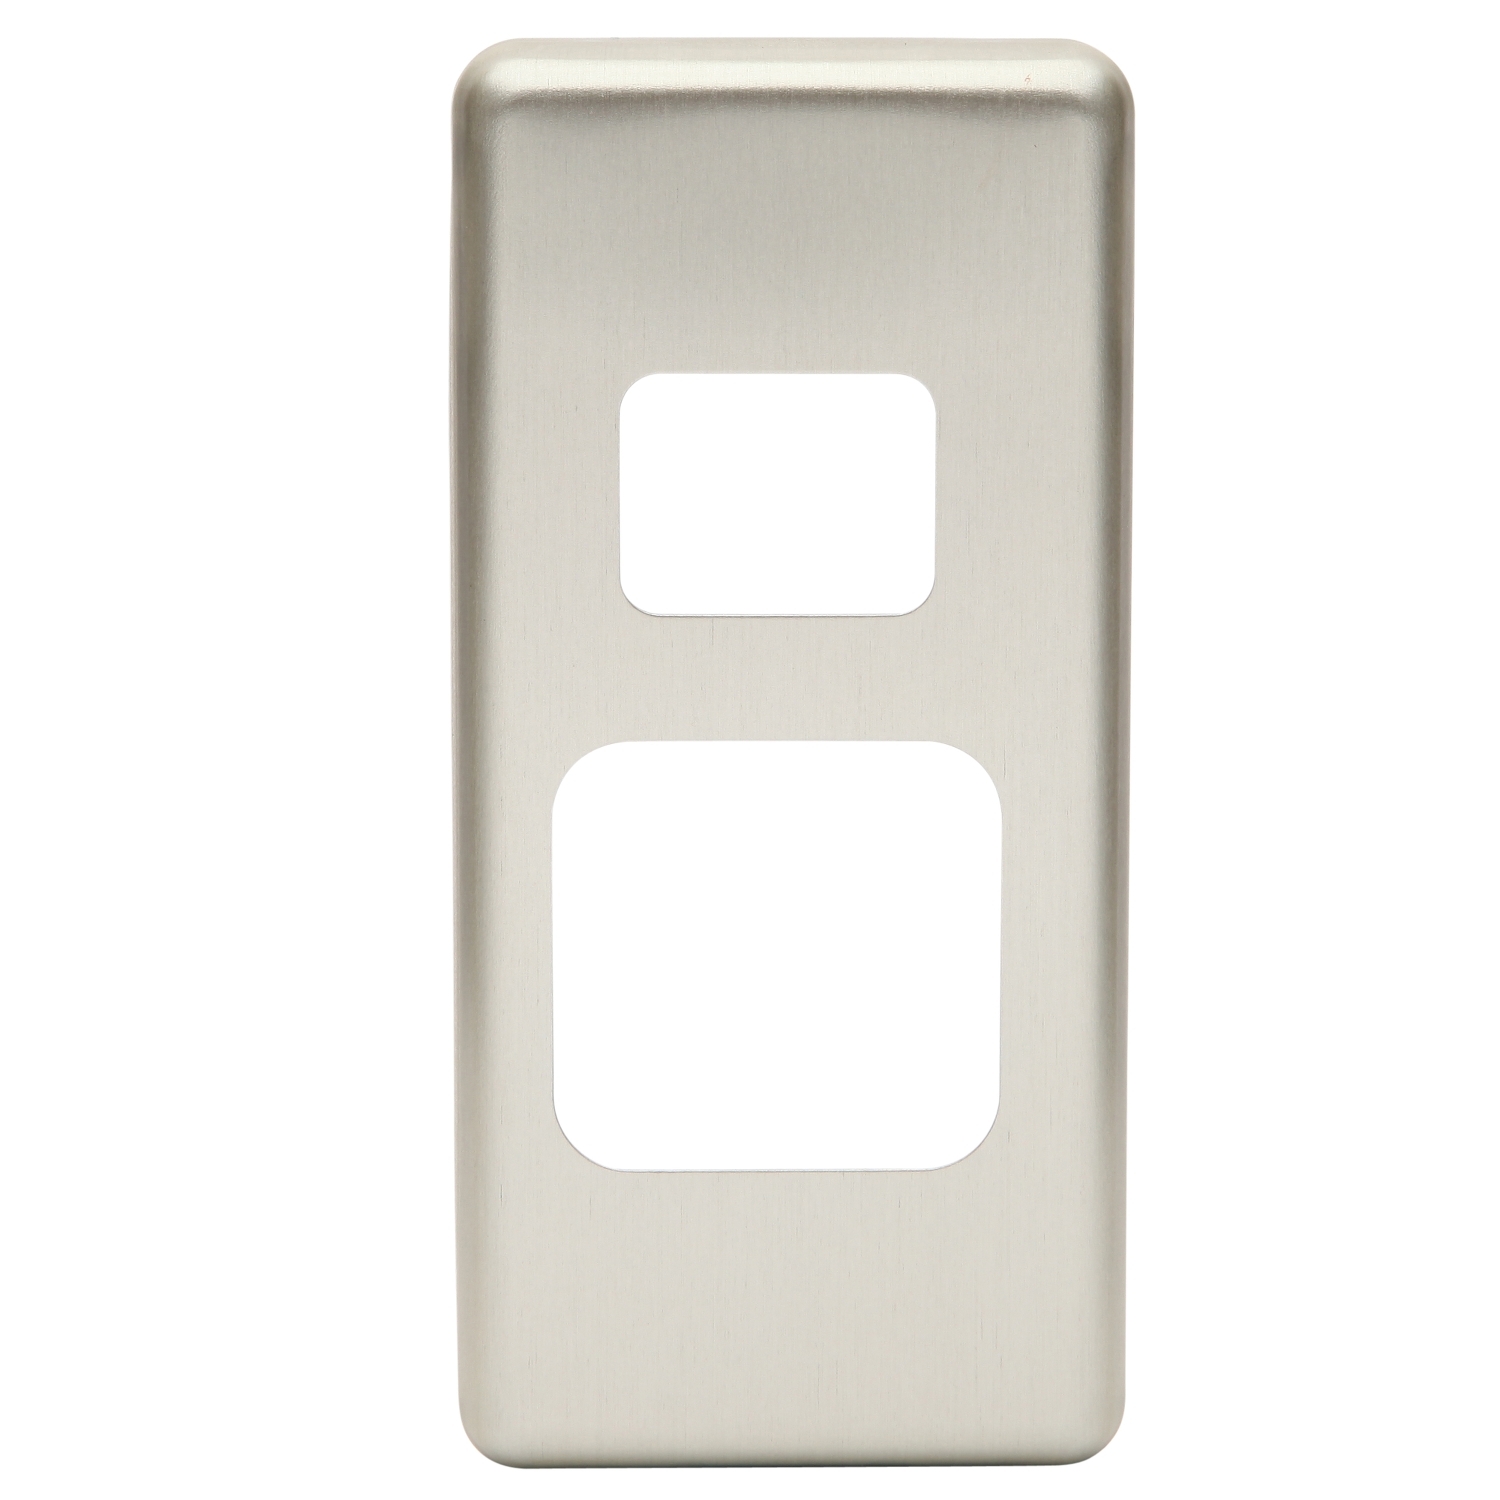 Socket Cover Plate For Worktop Single Switch Socket, Stainless Steel